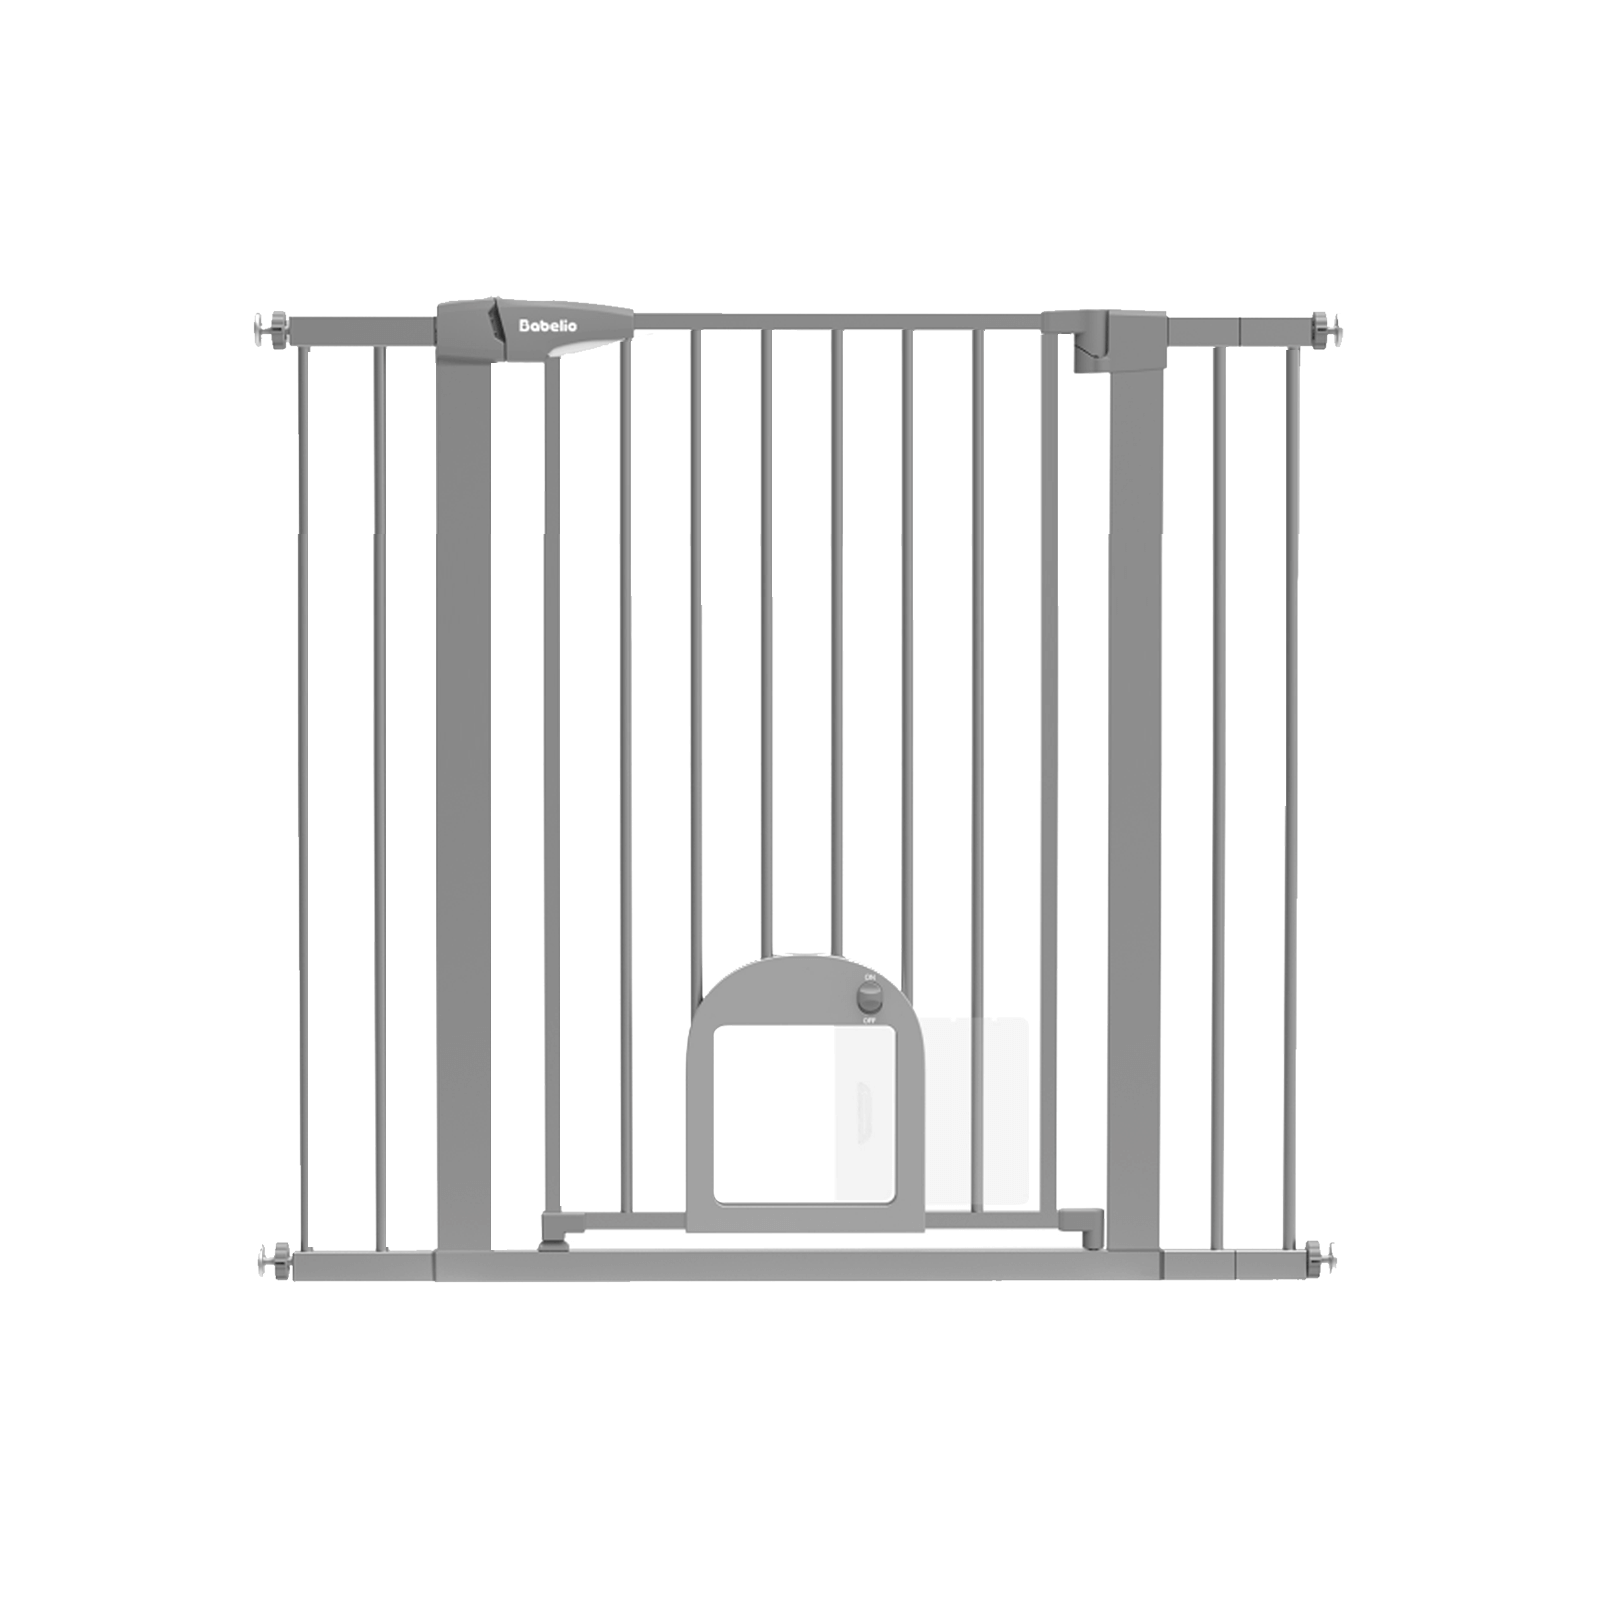 Babelio 36" High Baby Gate with Adjustable Cat Door – Auto-Close, 29-43" Wide, Ideal for Stairs and Doorways, Durable Design